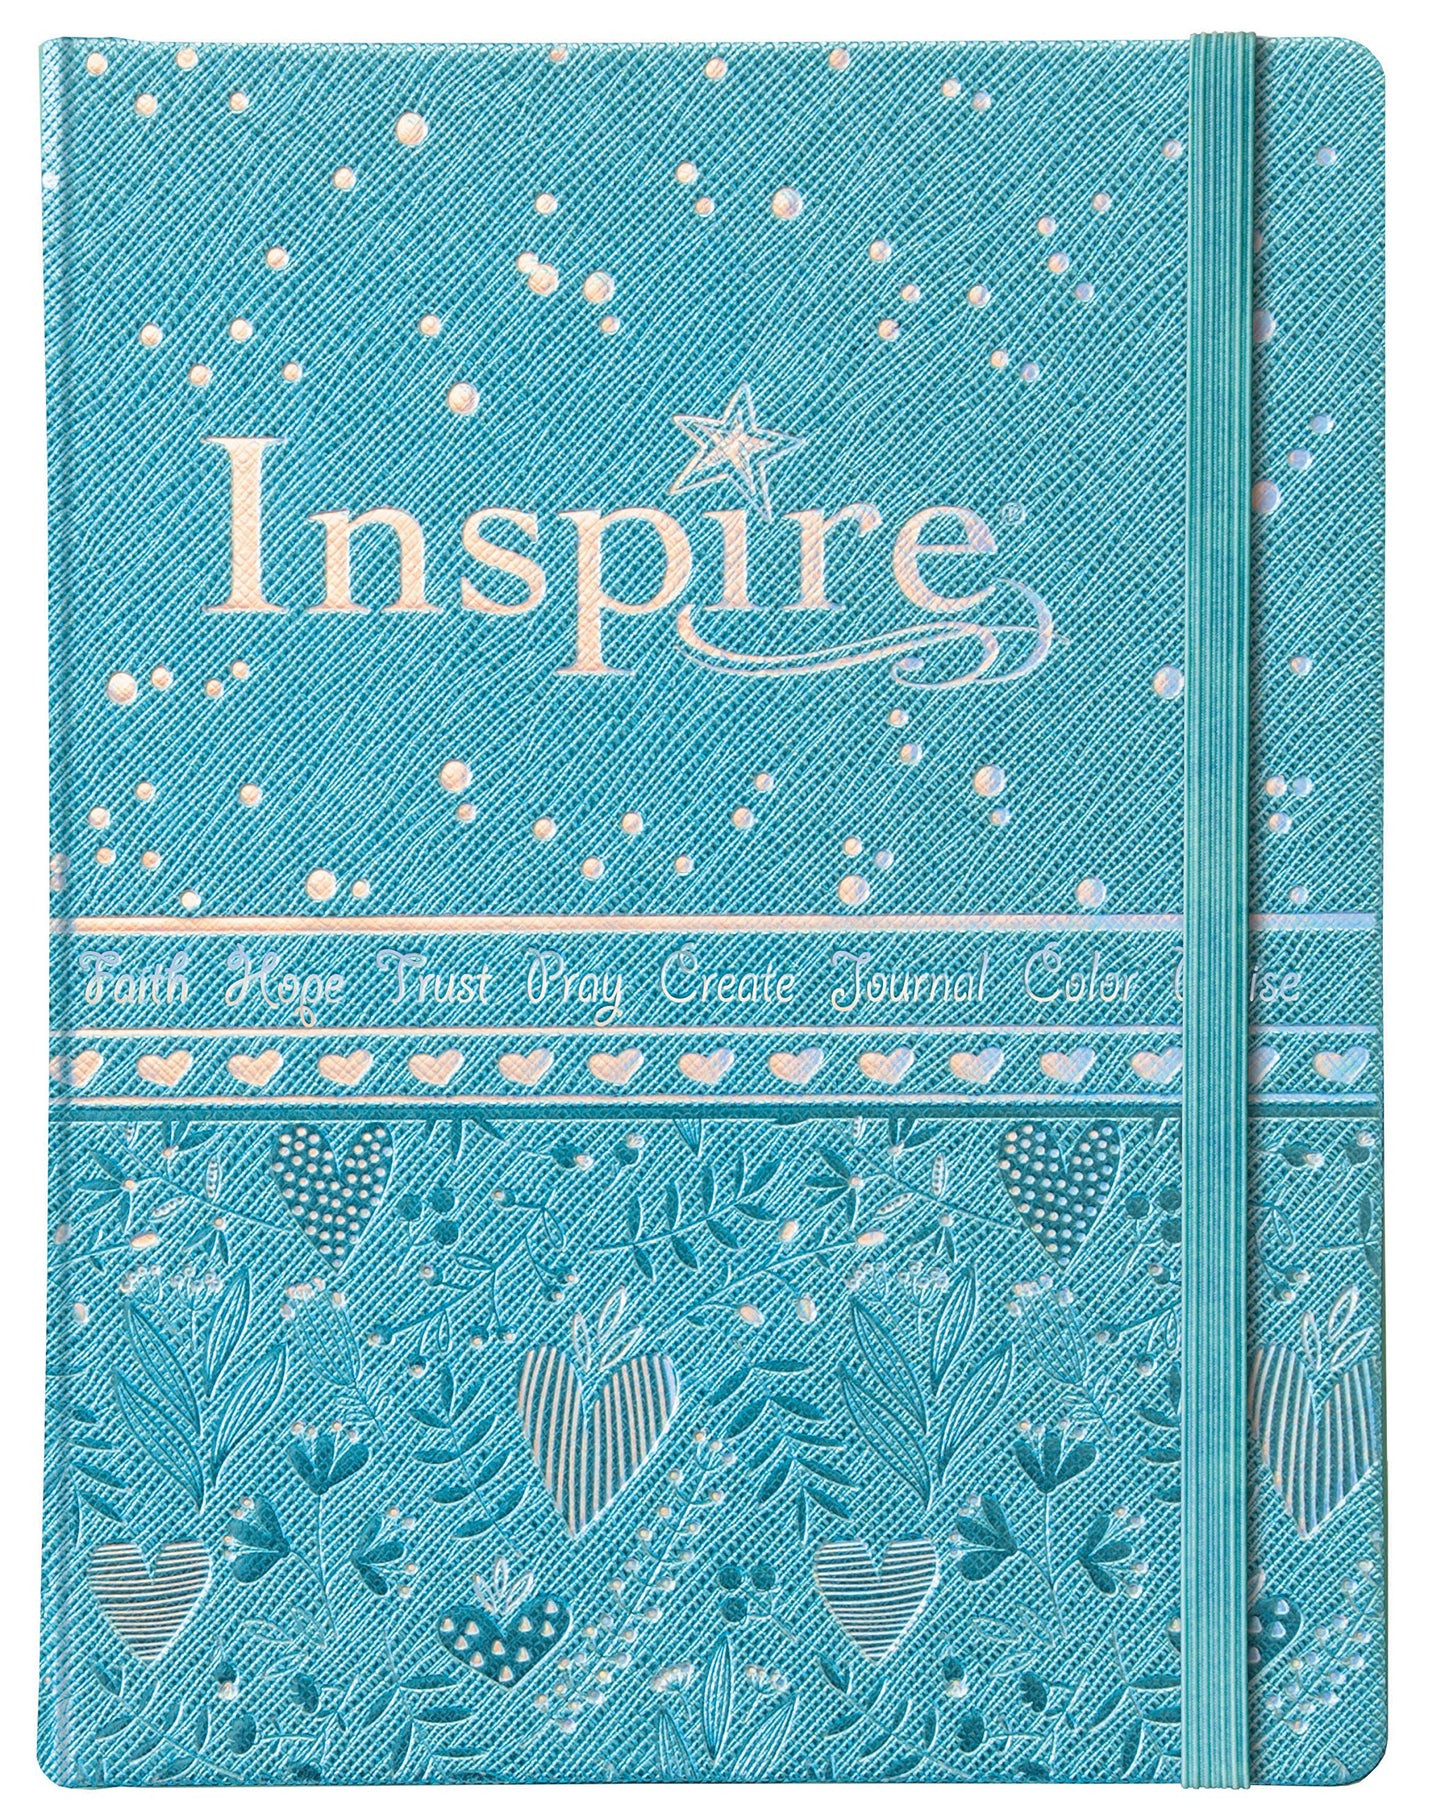 Tyndale NLT Inspire Bible for Girls (Hardcover LeatherLike, Metallic Blue): Journaling and Coloring Bible for Kids – Over 500 Scripture Illustrations to Color - Creative Bible Journal